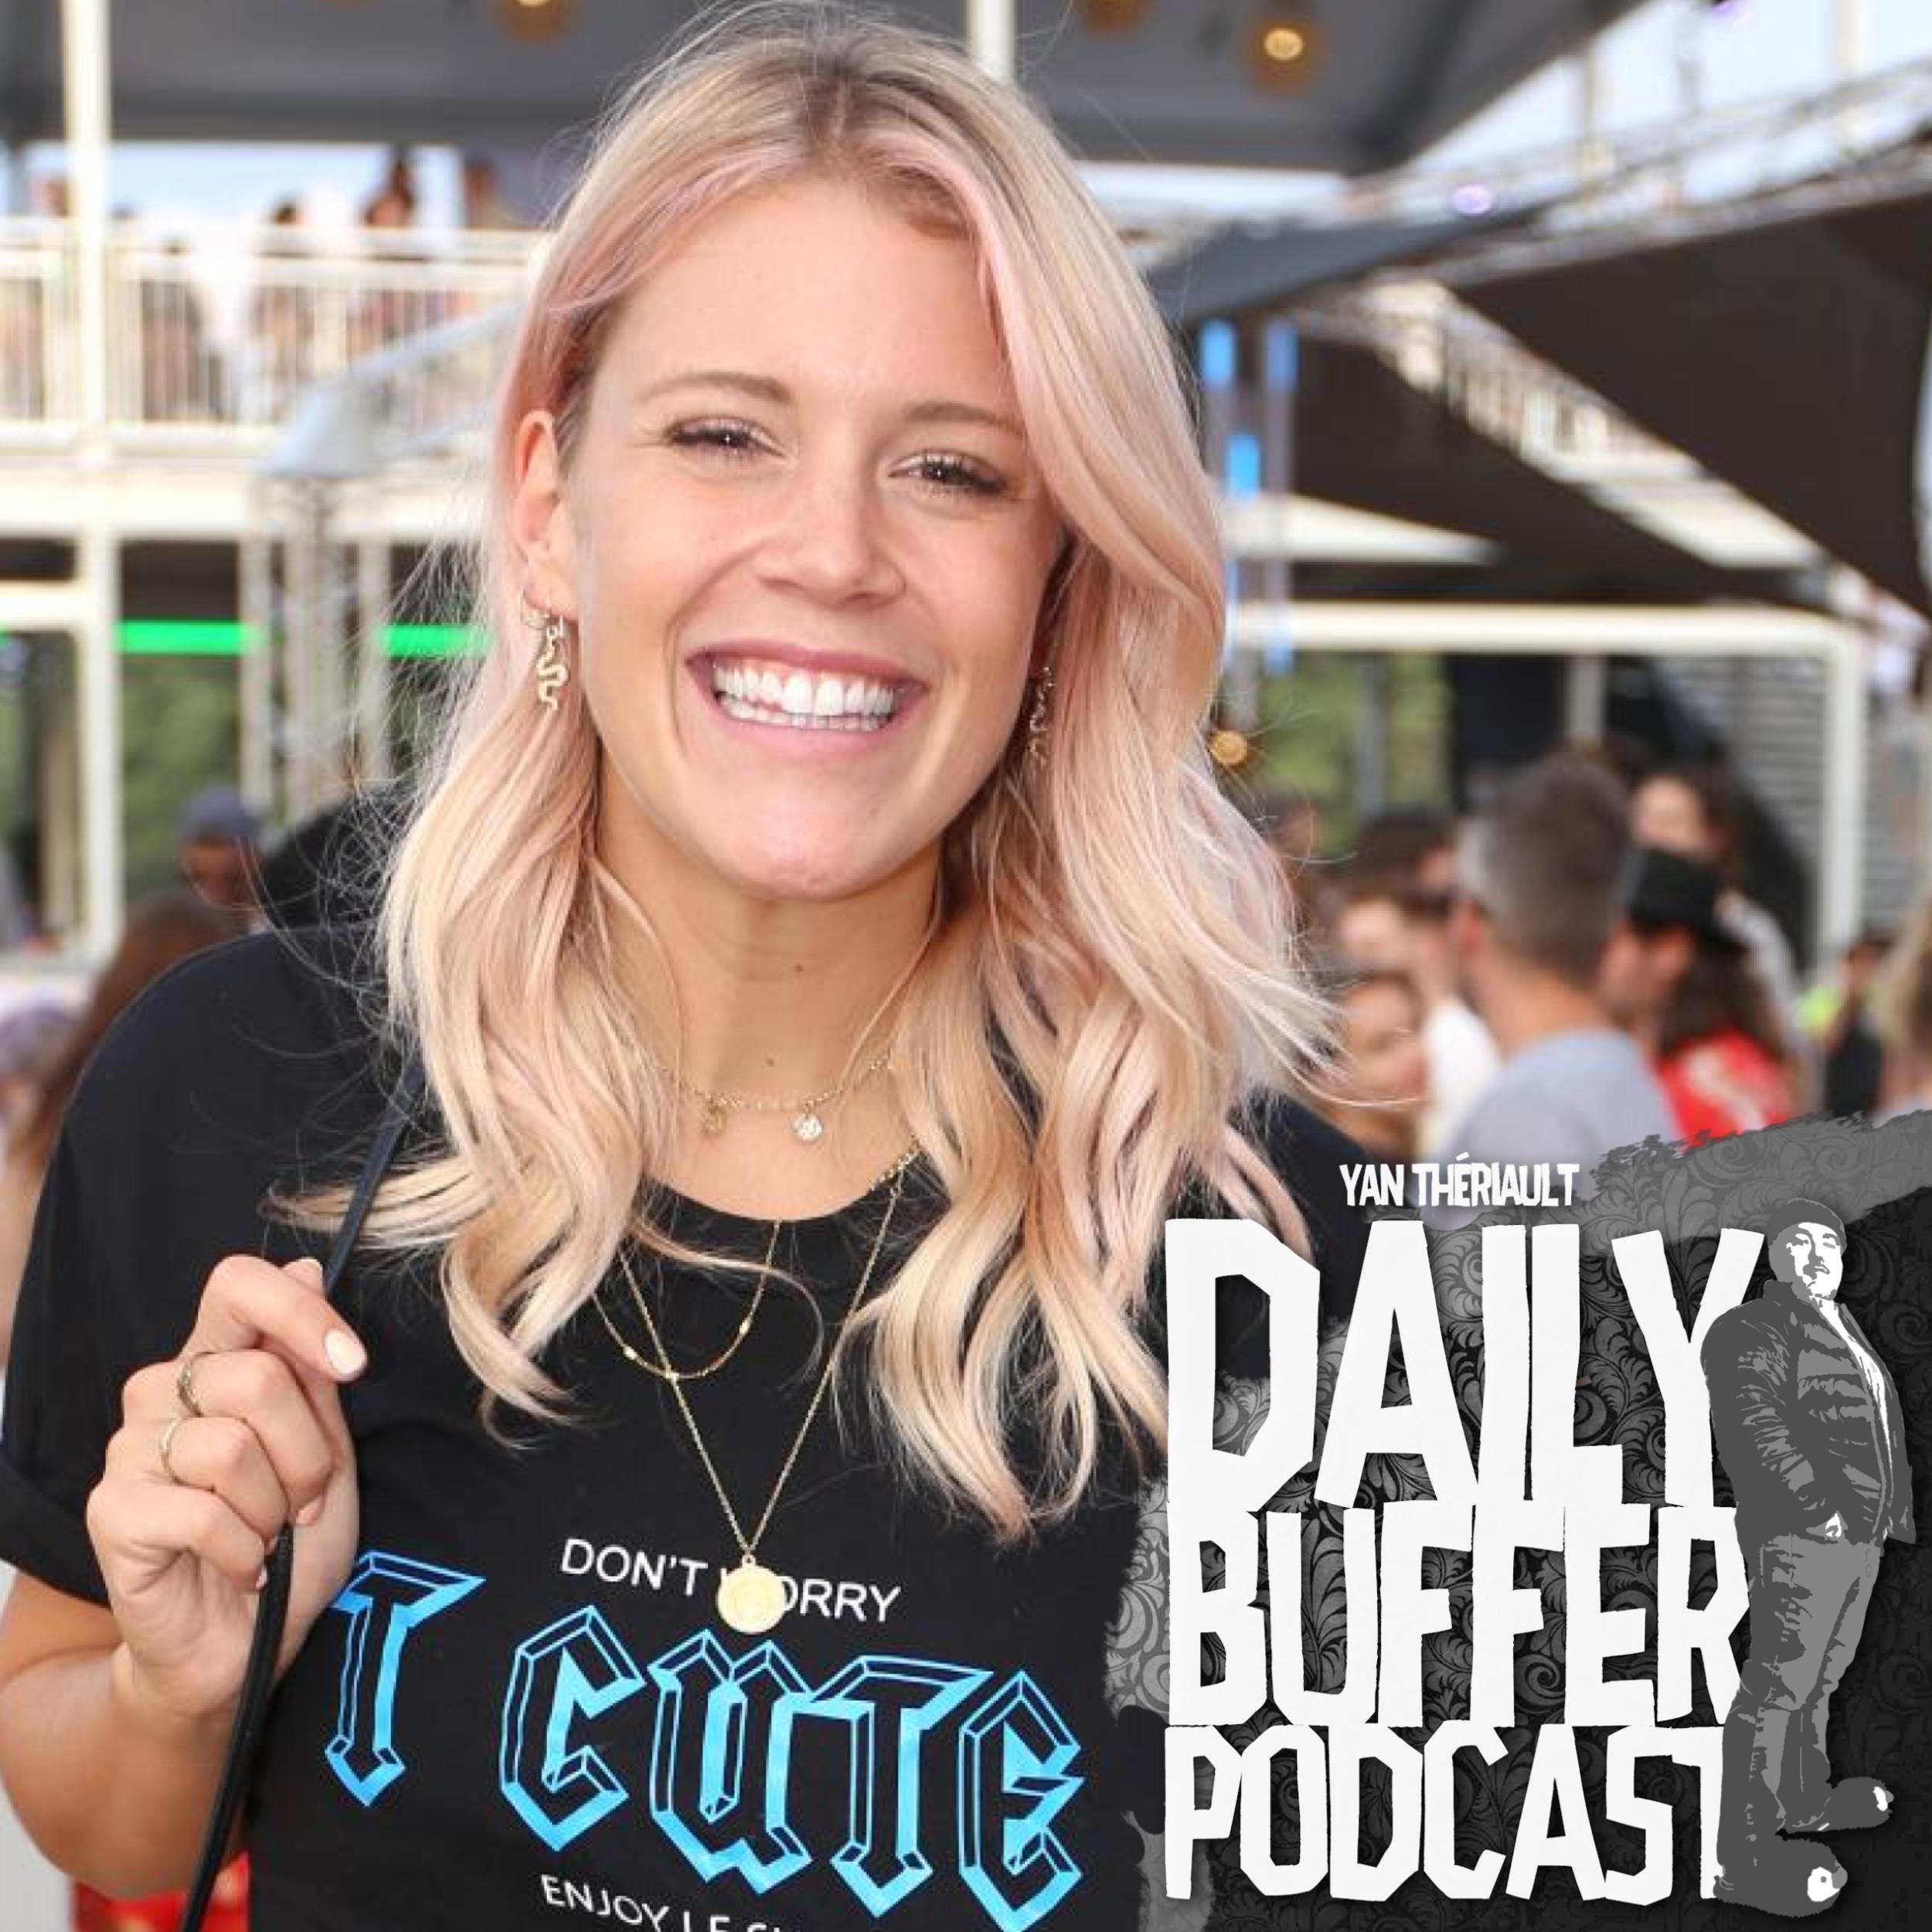 Faith in influencers restored - Le Daily Buffer Podcast - 2020 03 20 l Yan